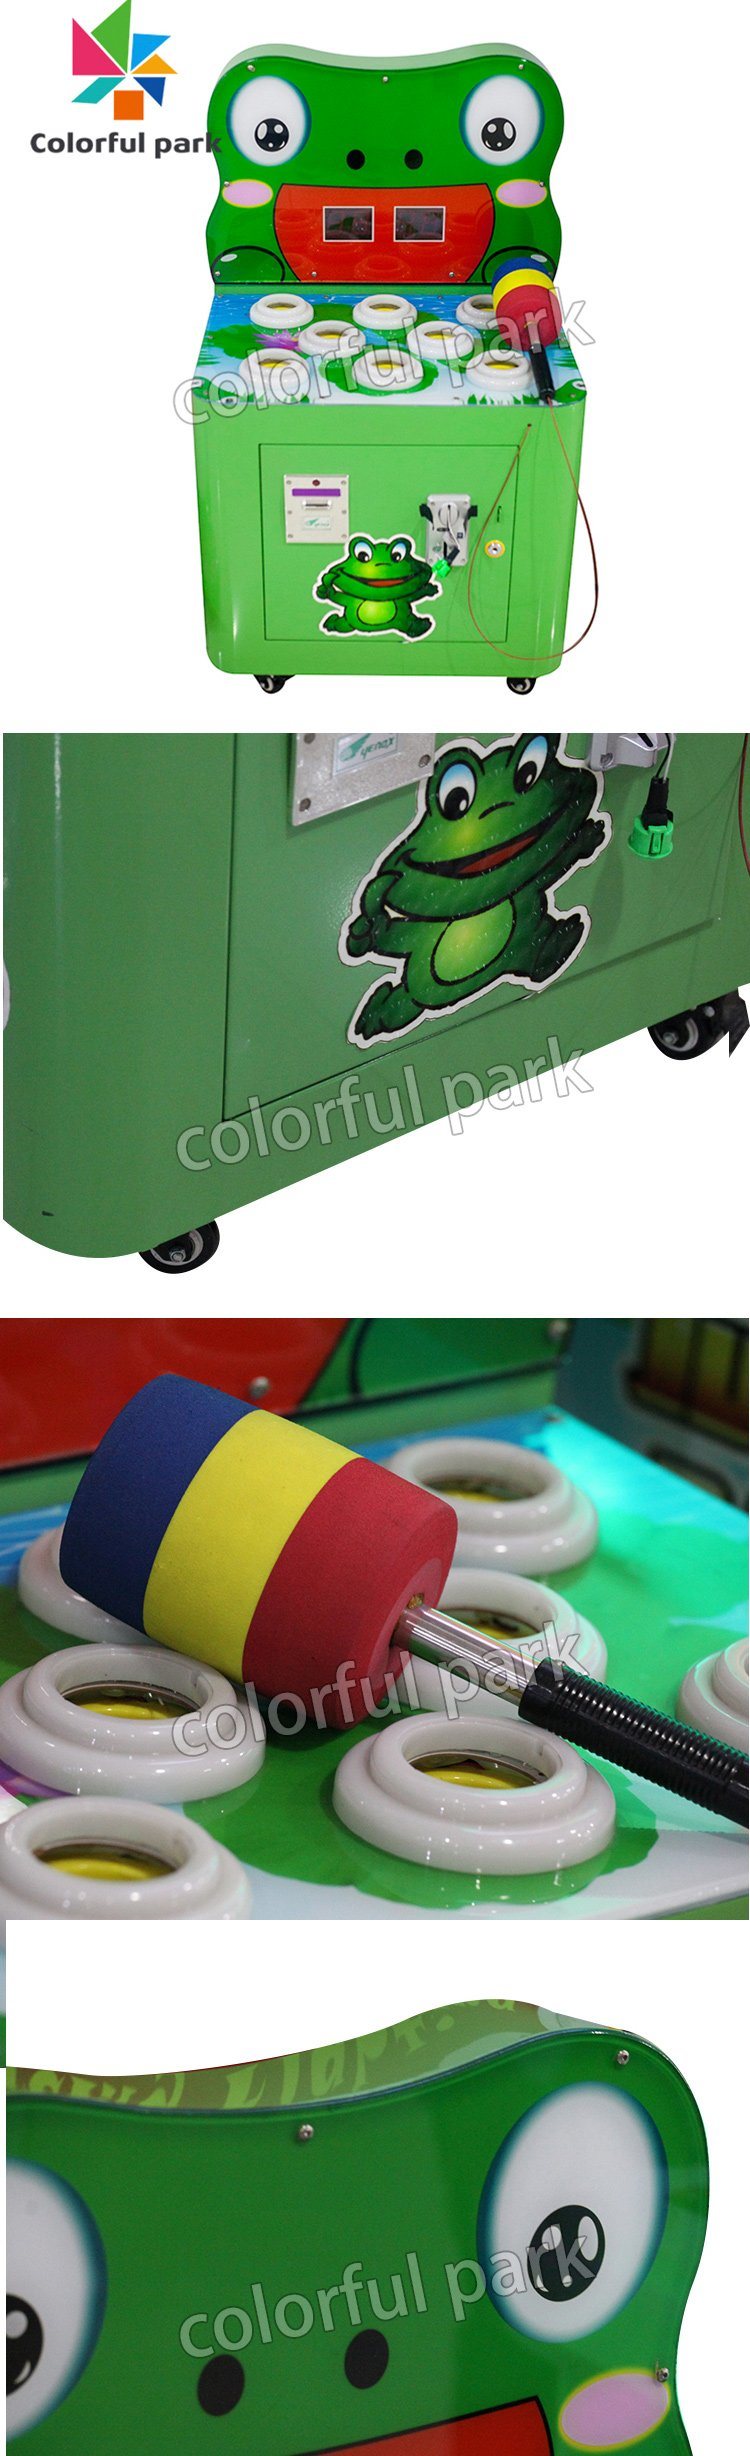 Colorful Park Children Games Whack a Mole Kids Hammer Hit Frog Arcade Game